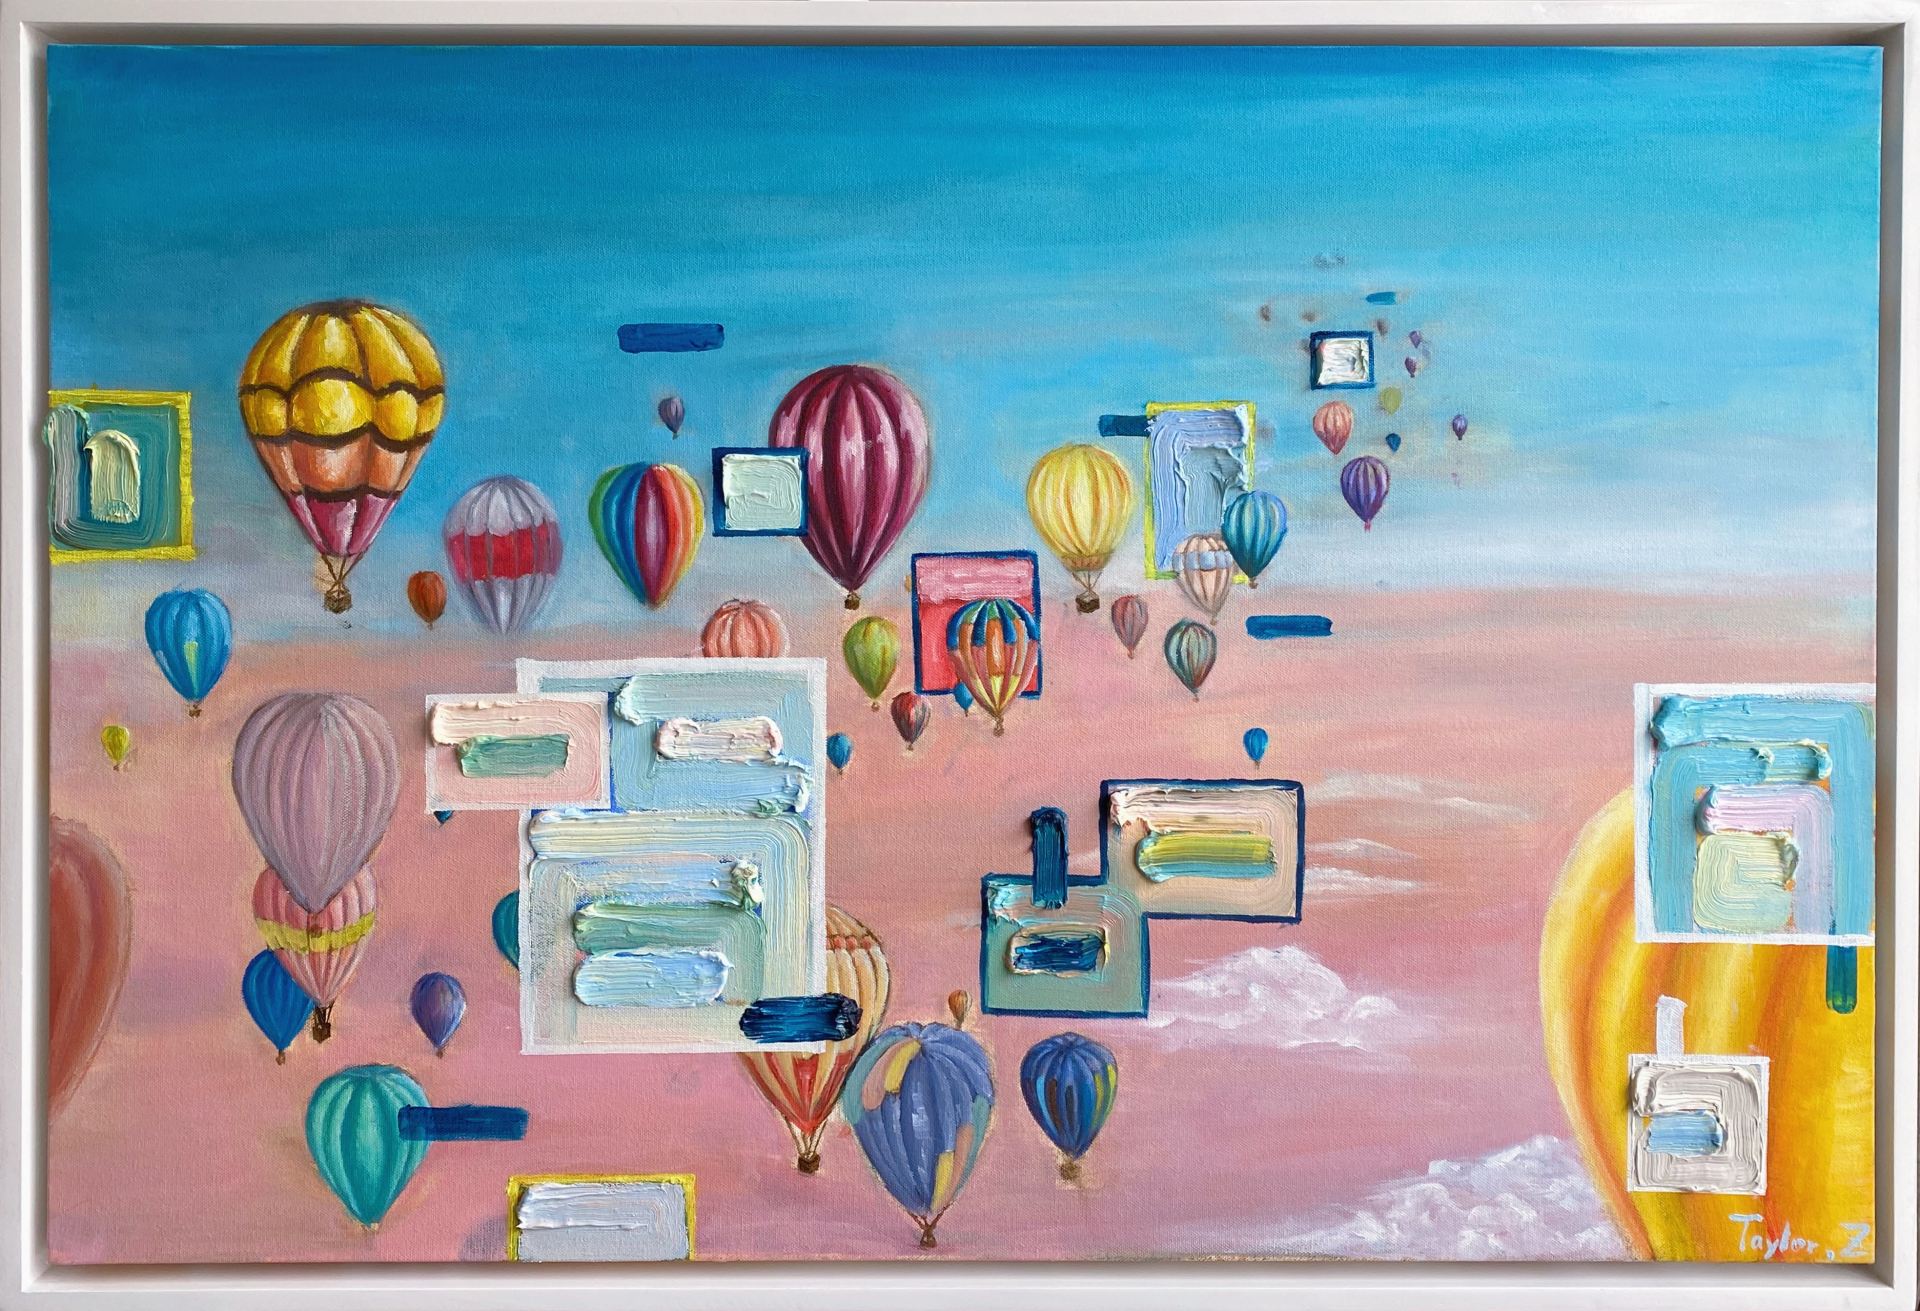 An oil painting of some hot-air balloons against a pink and blue sky.